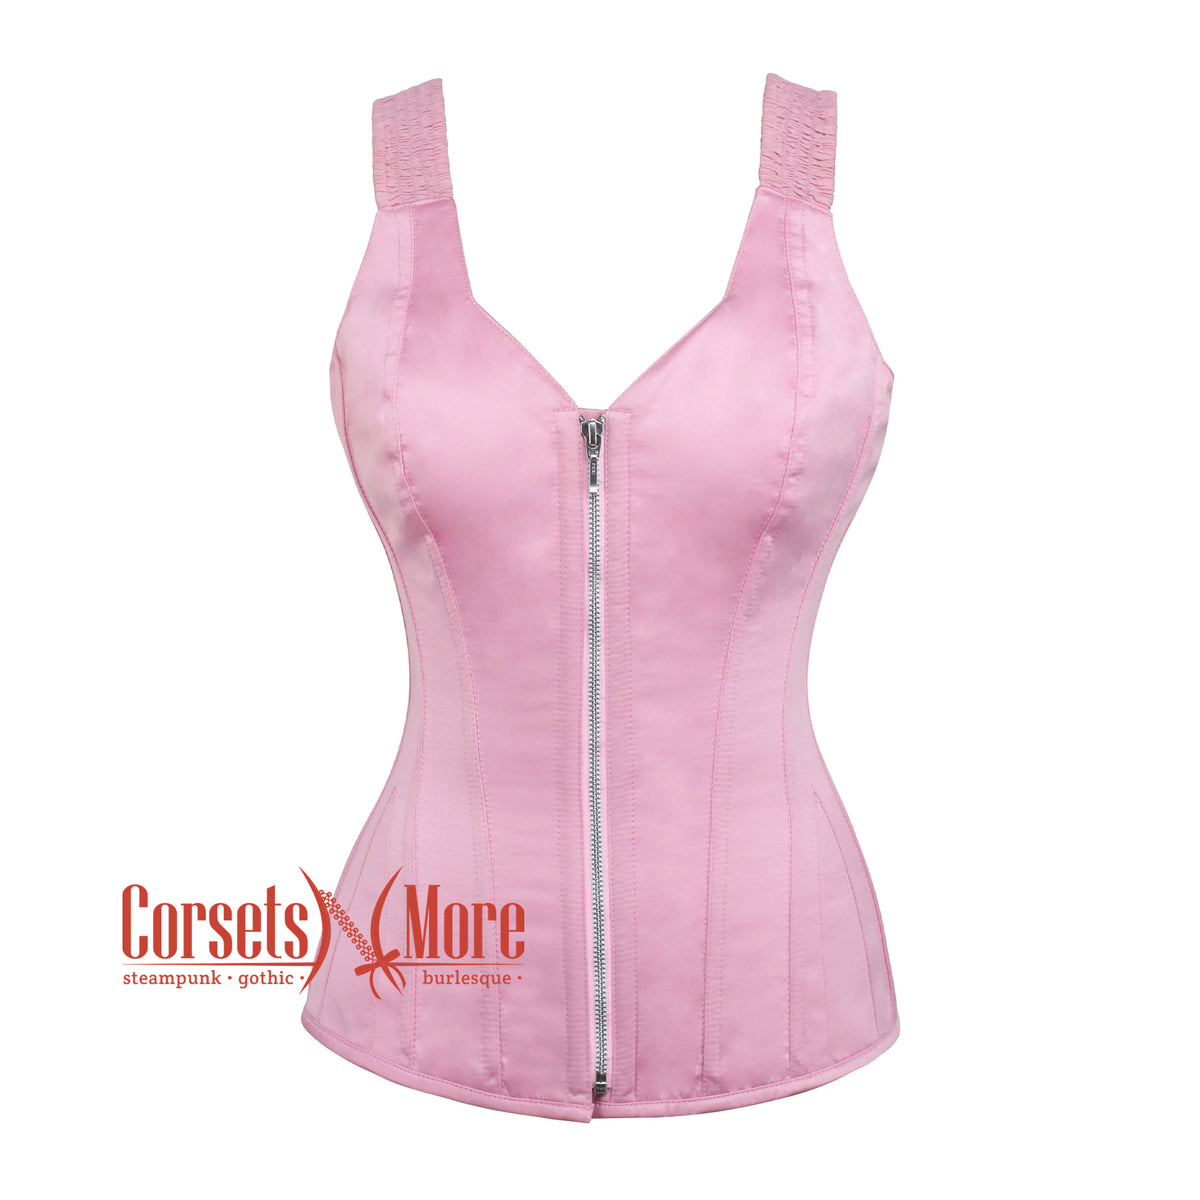 Baby Pink Satin Gothic Overbust Corset With Shoulder Strap Bustier

– CorsetsNmore